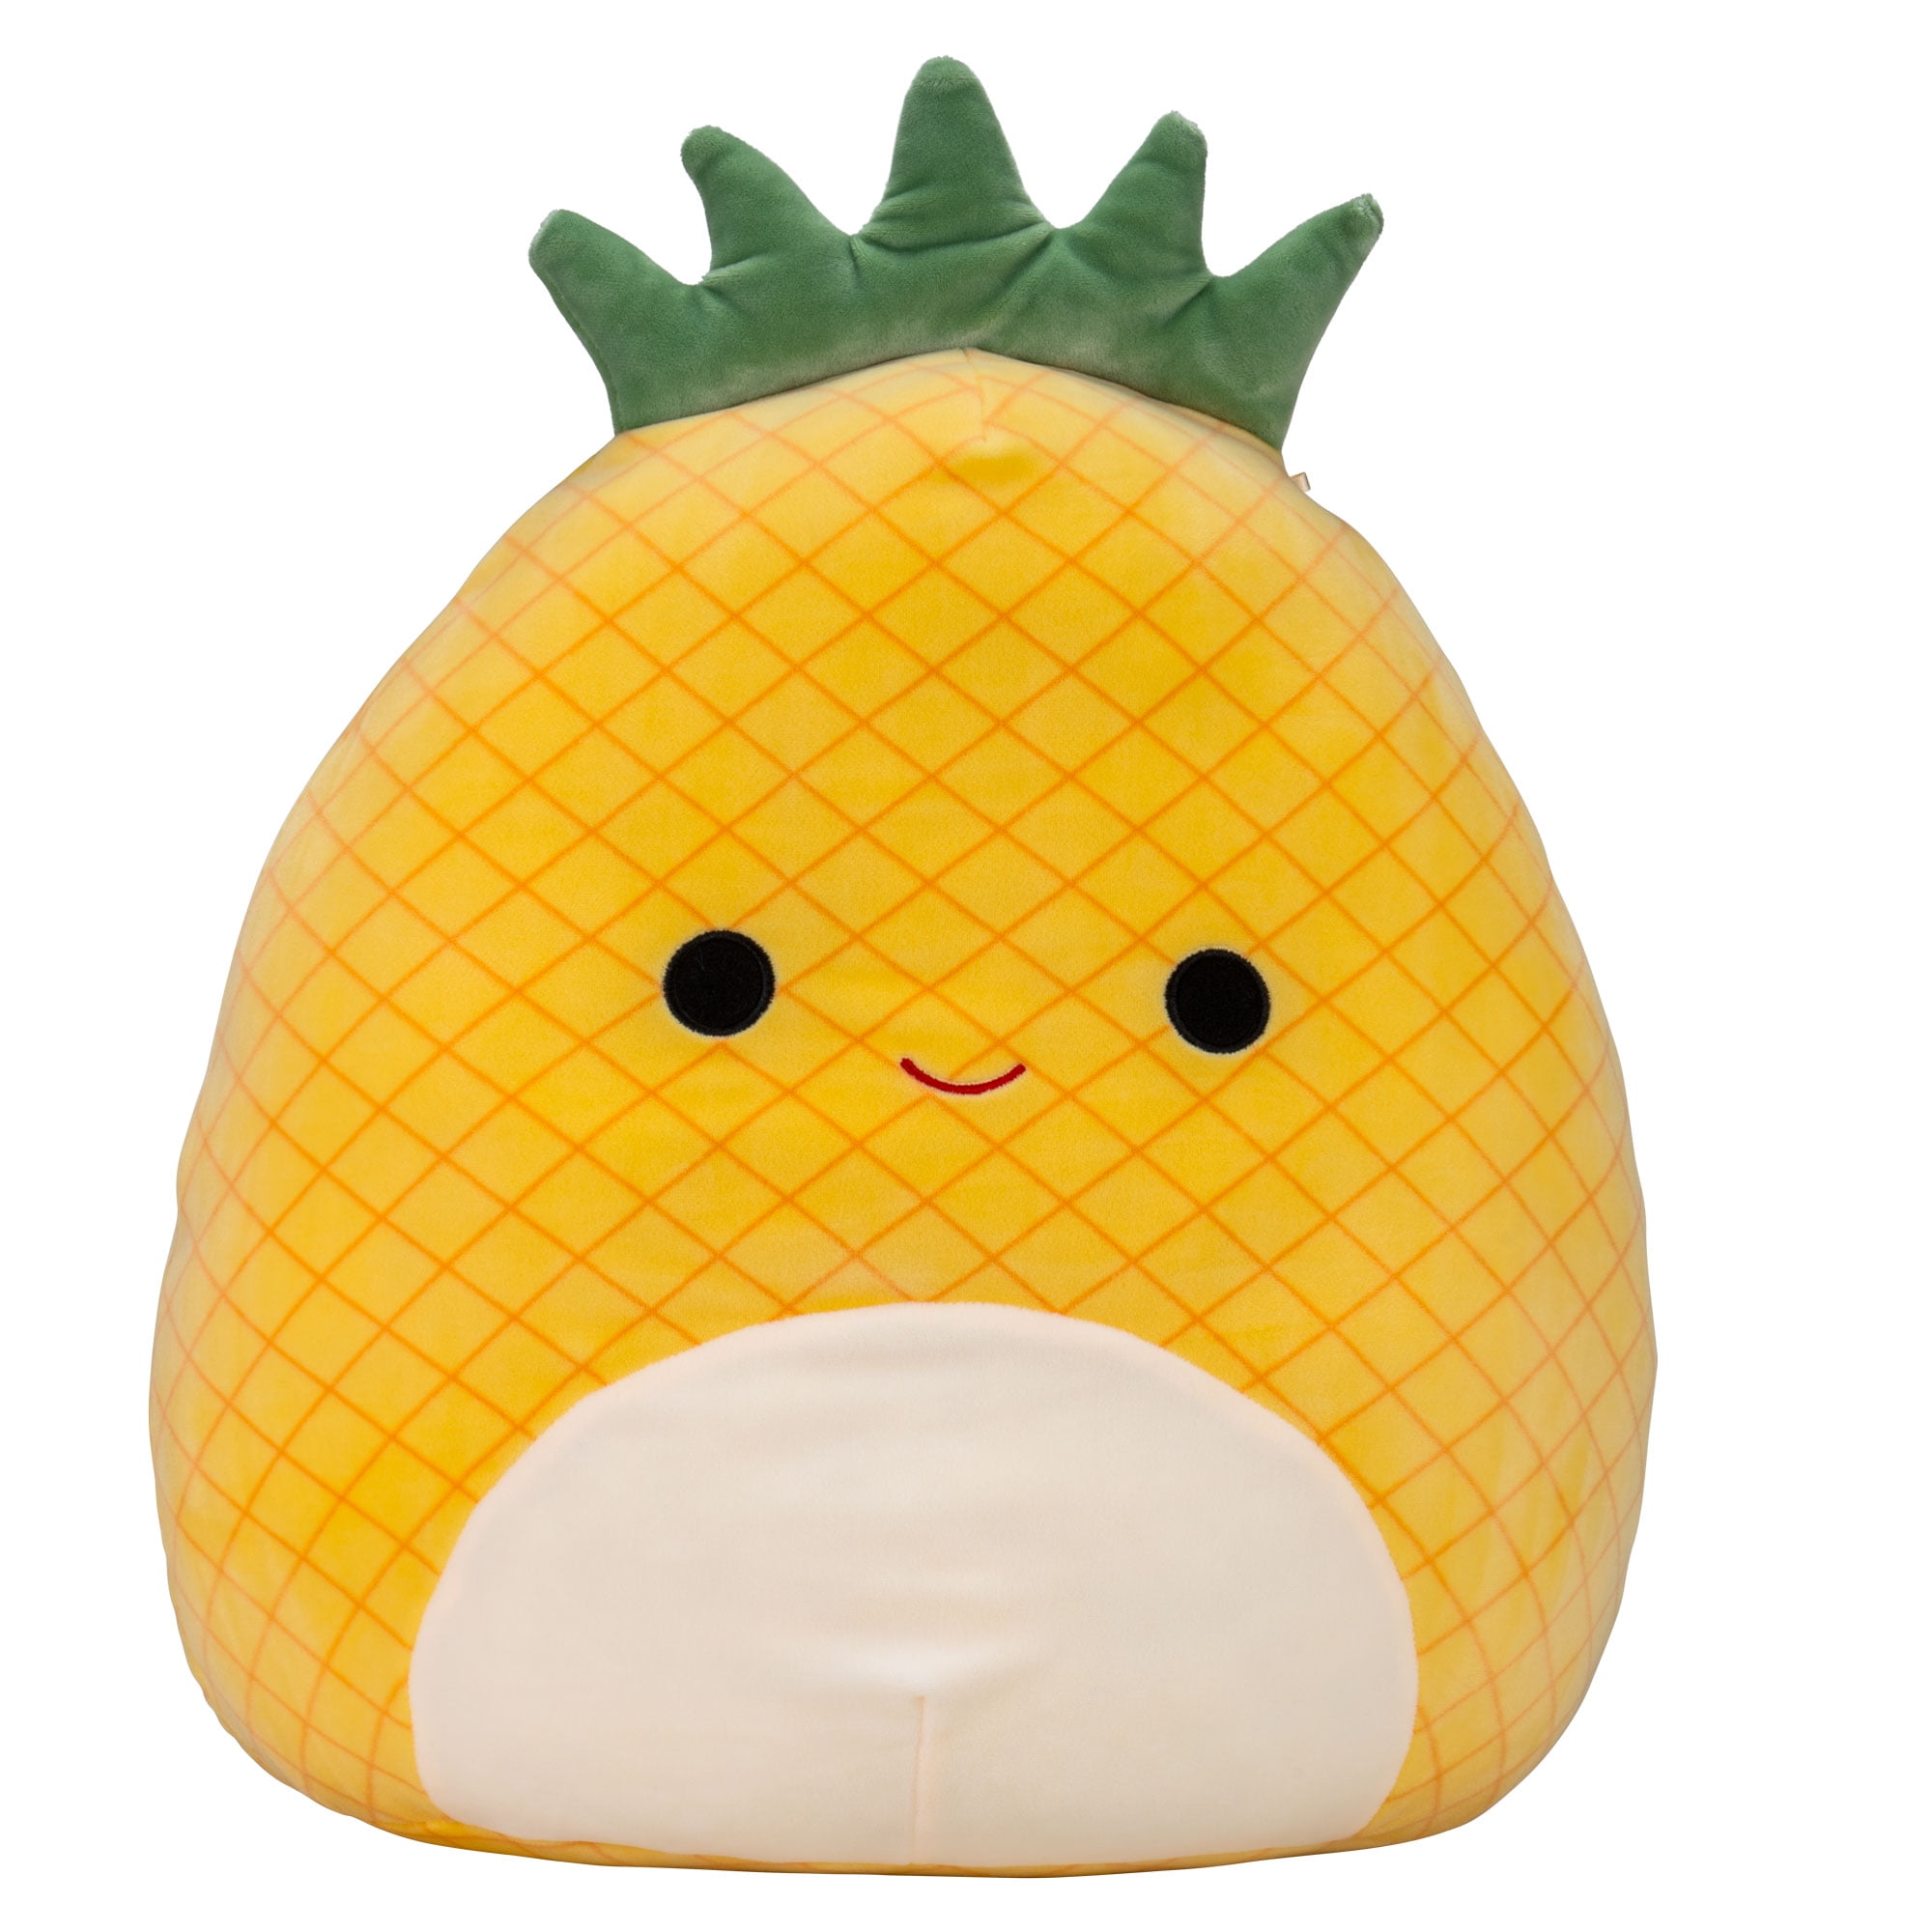 Pineapple Squishmallow Kellytoy 8 Inches RARE HTF for sale online 